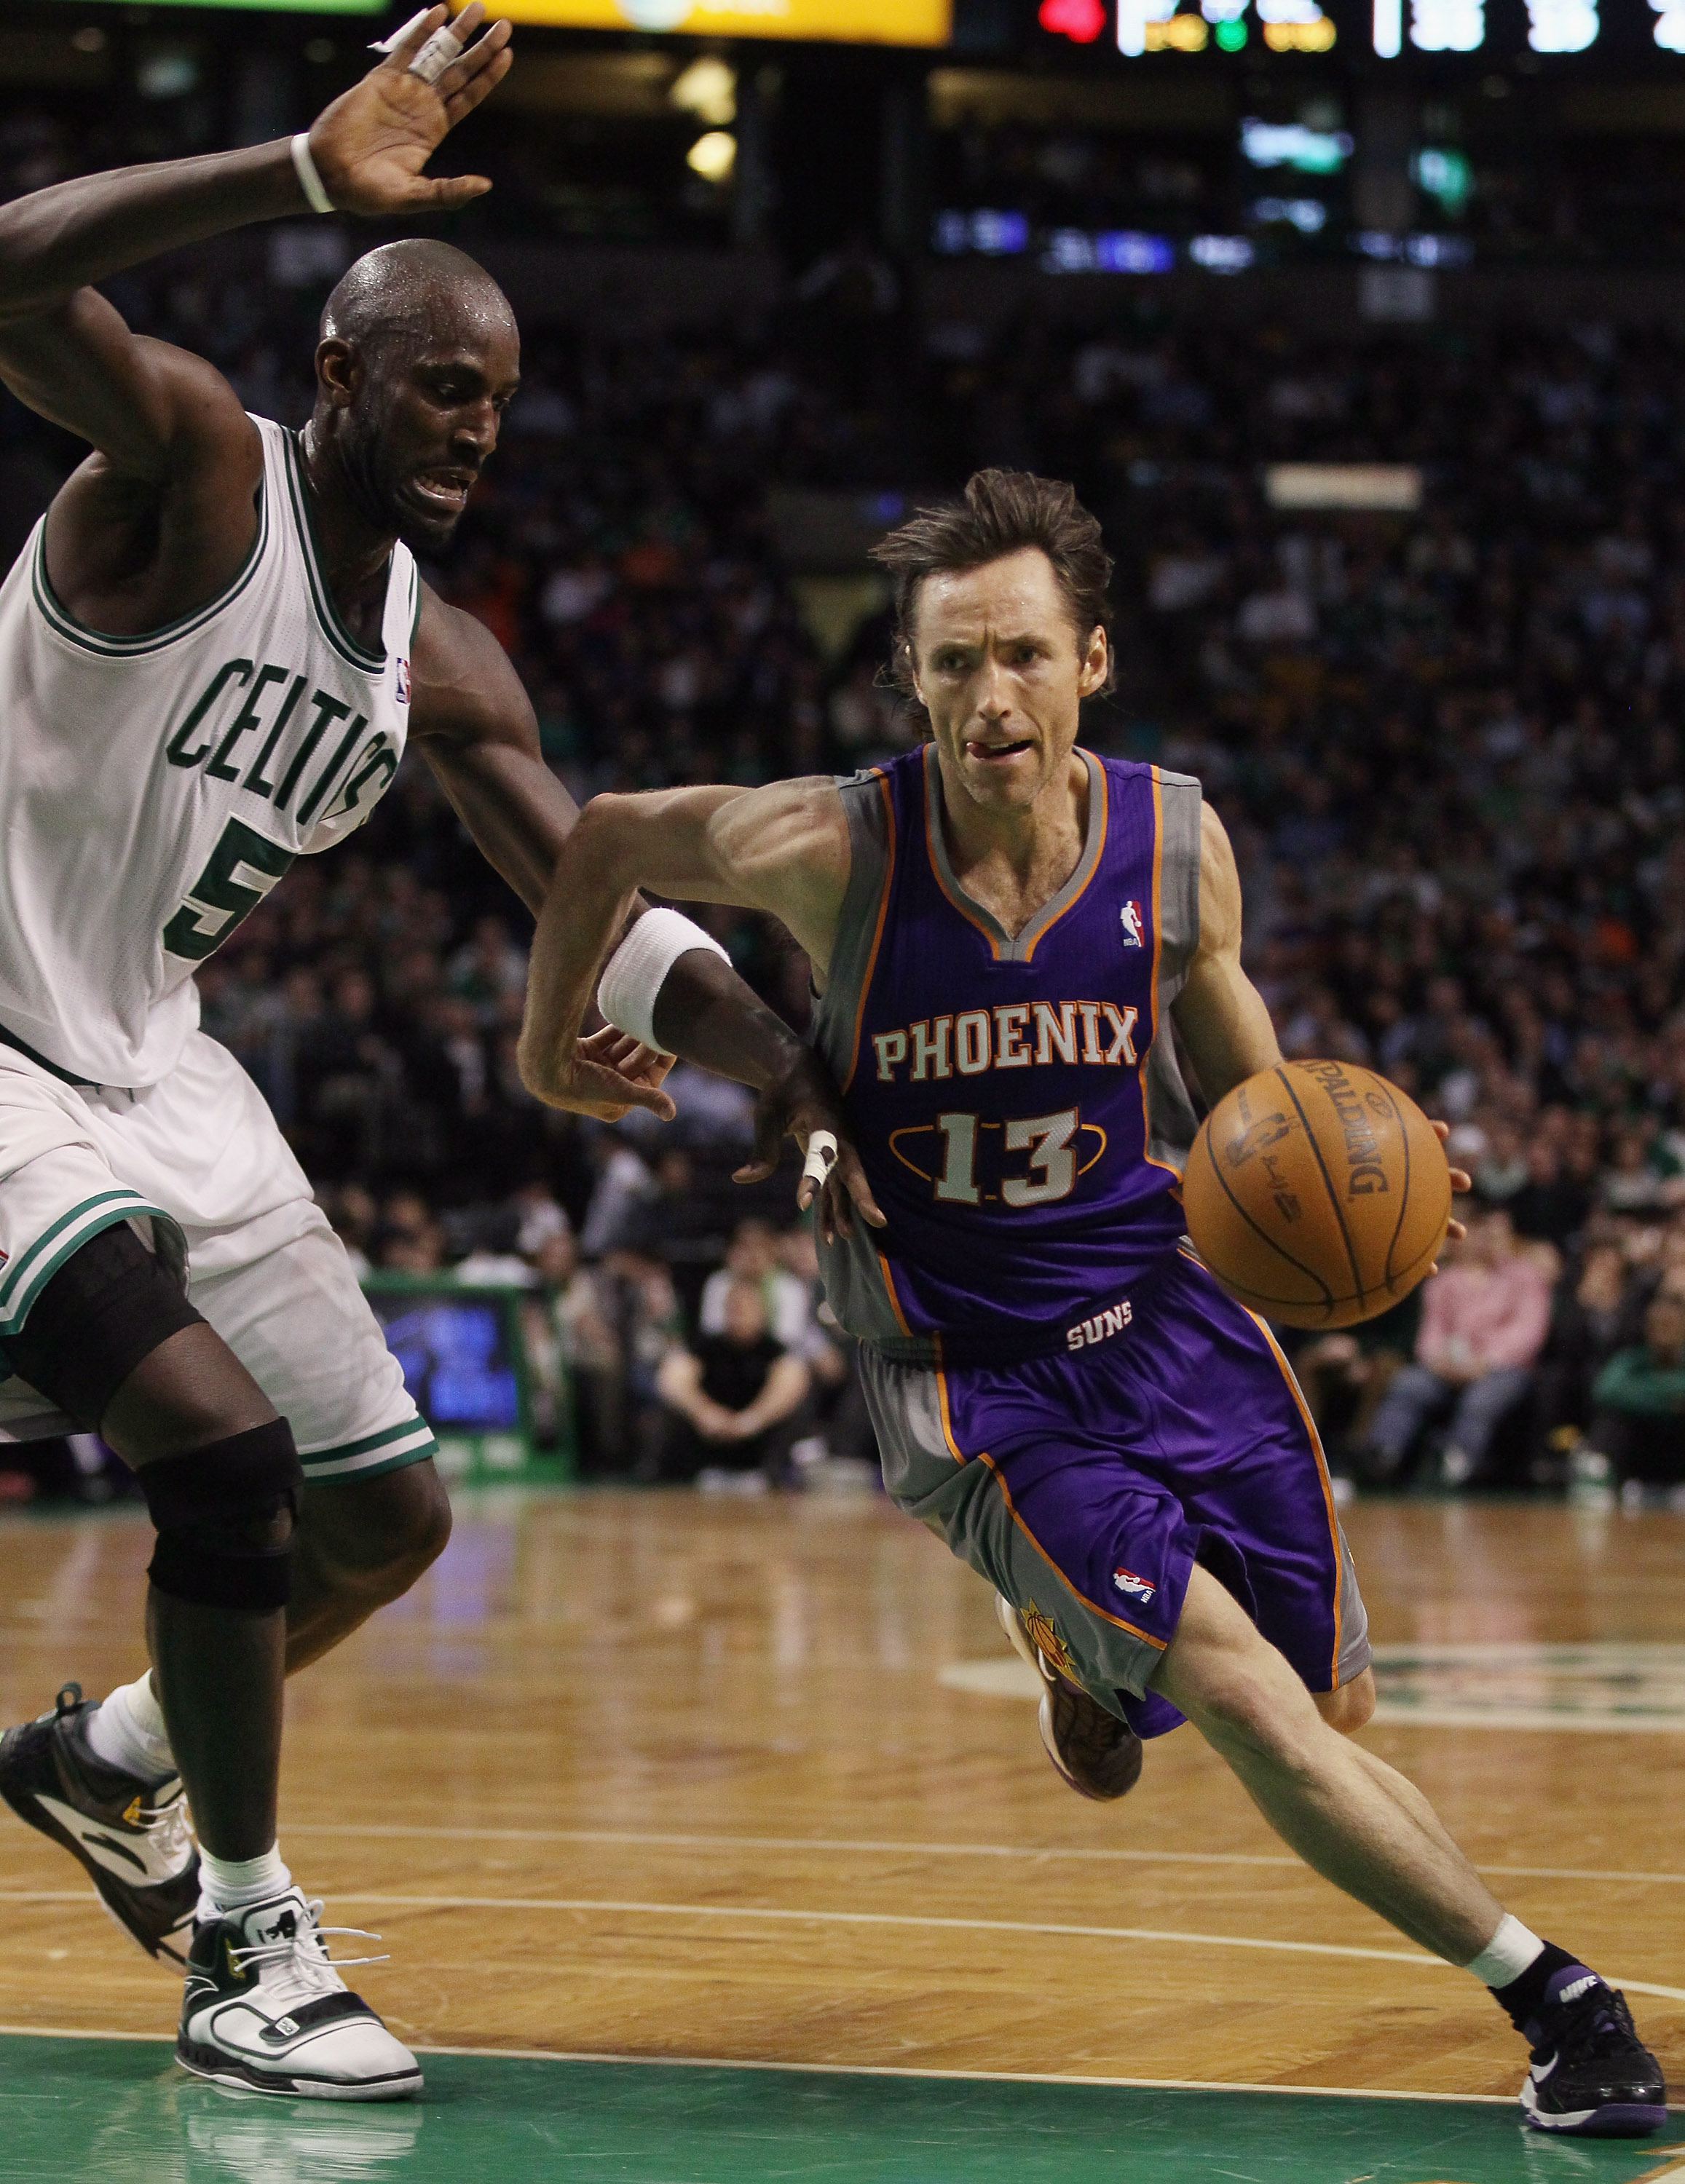 BOSTON, MA - MARCH 02:  Steve Nash #13 of the Phoenix Suns drives around Kevin Garnett #5 of the Boston Celtics on March 2, 2011 at the TD Garden in Boston, Massachusetts.  The Celtics defeated the Suns 115-103. NOTE TO USER: User expressly acknowledges a